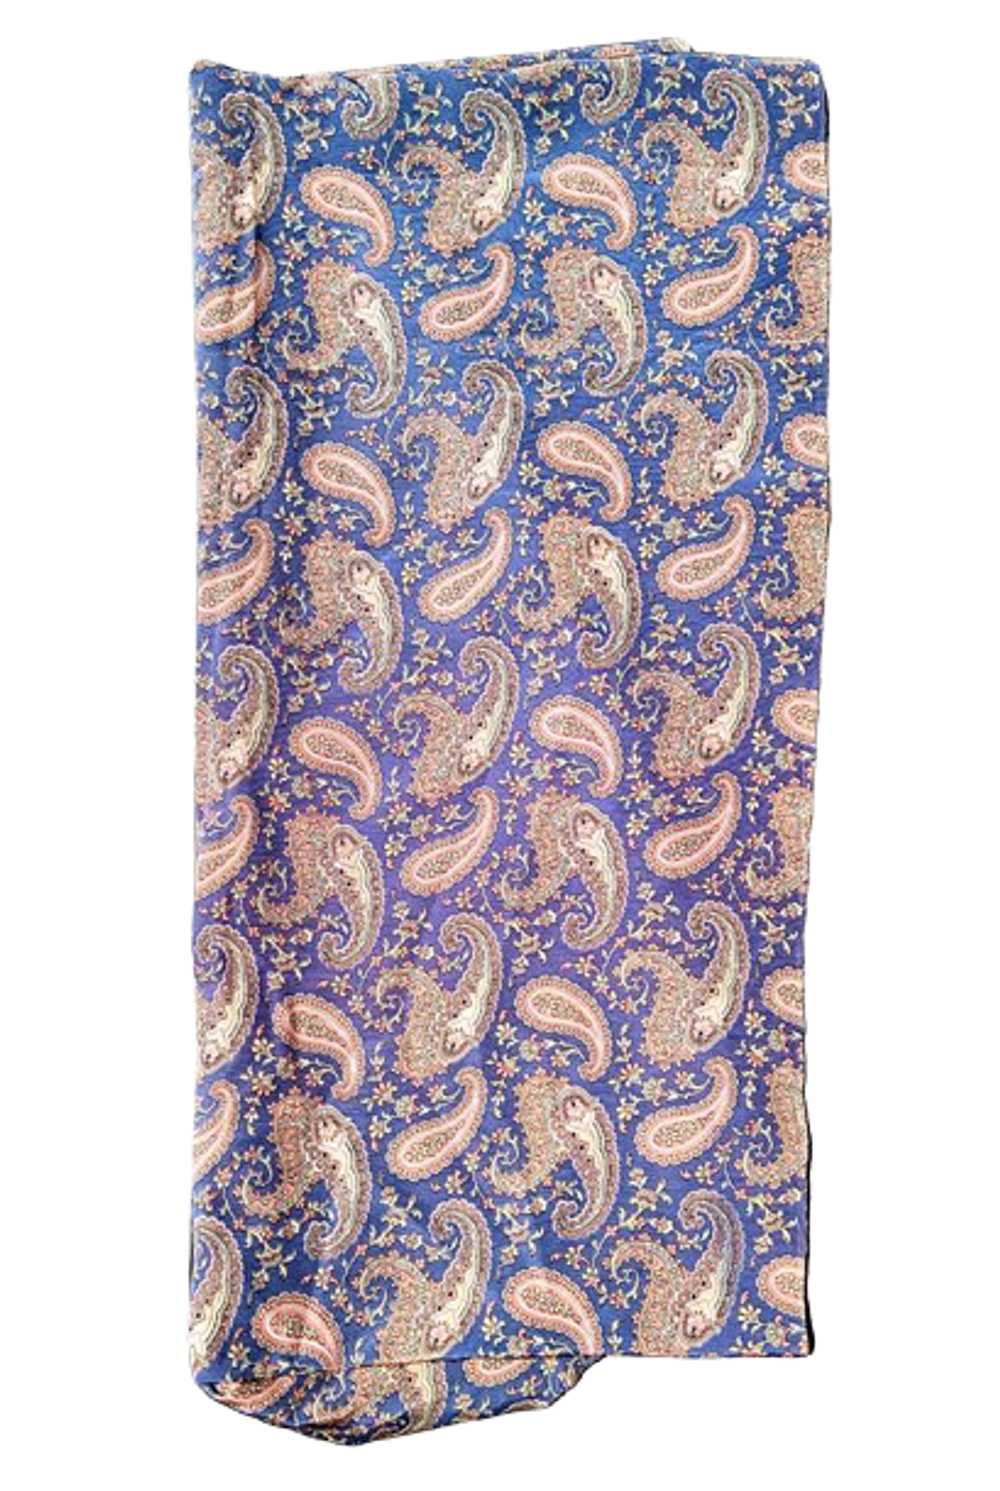 True Vintage 1940s Dusty Blue And Peach Paisley R… - image 3